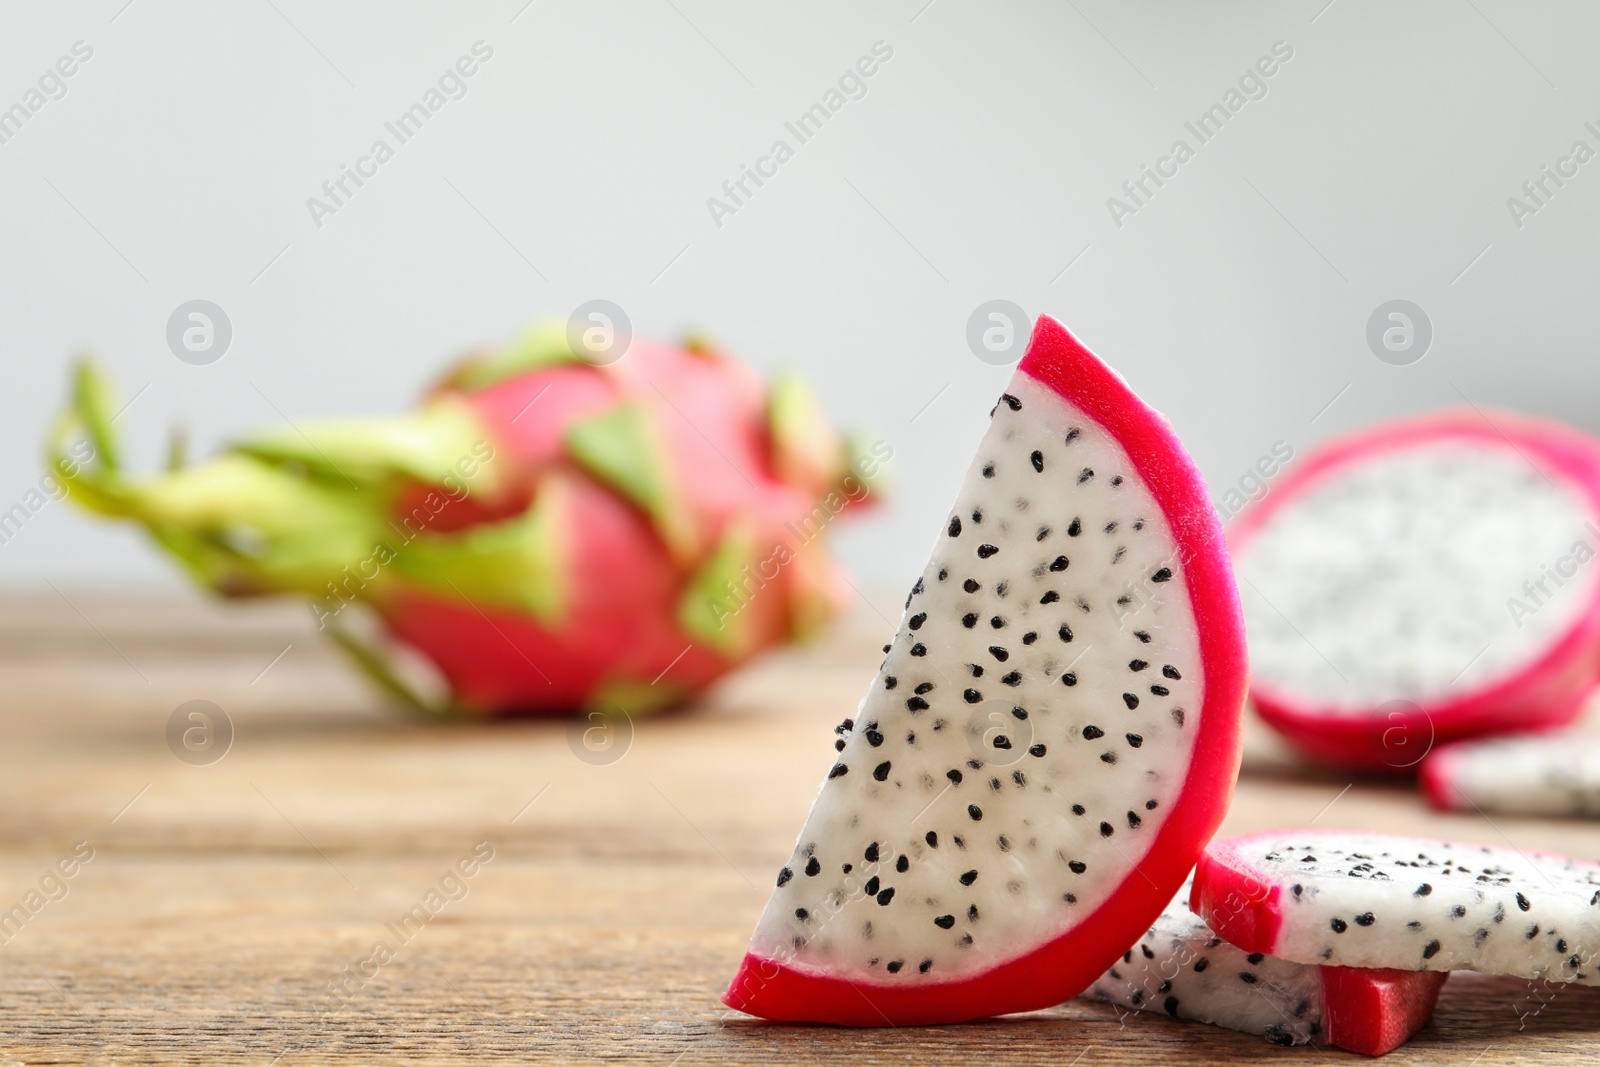 Photo of Slices of delicious ripe dragon fruit (pitahaya) on wooden table. Space for text